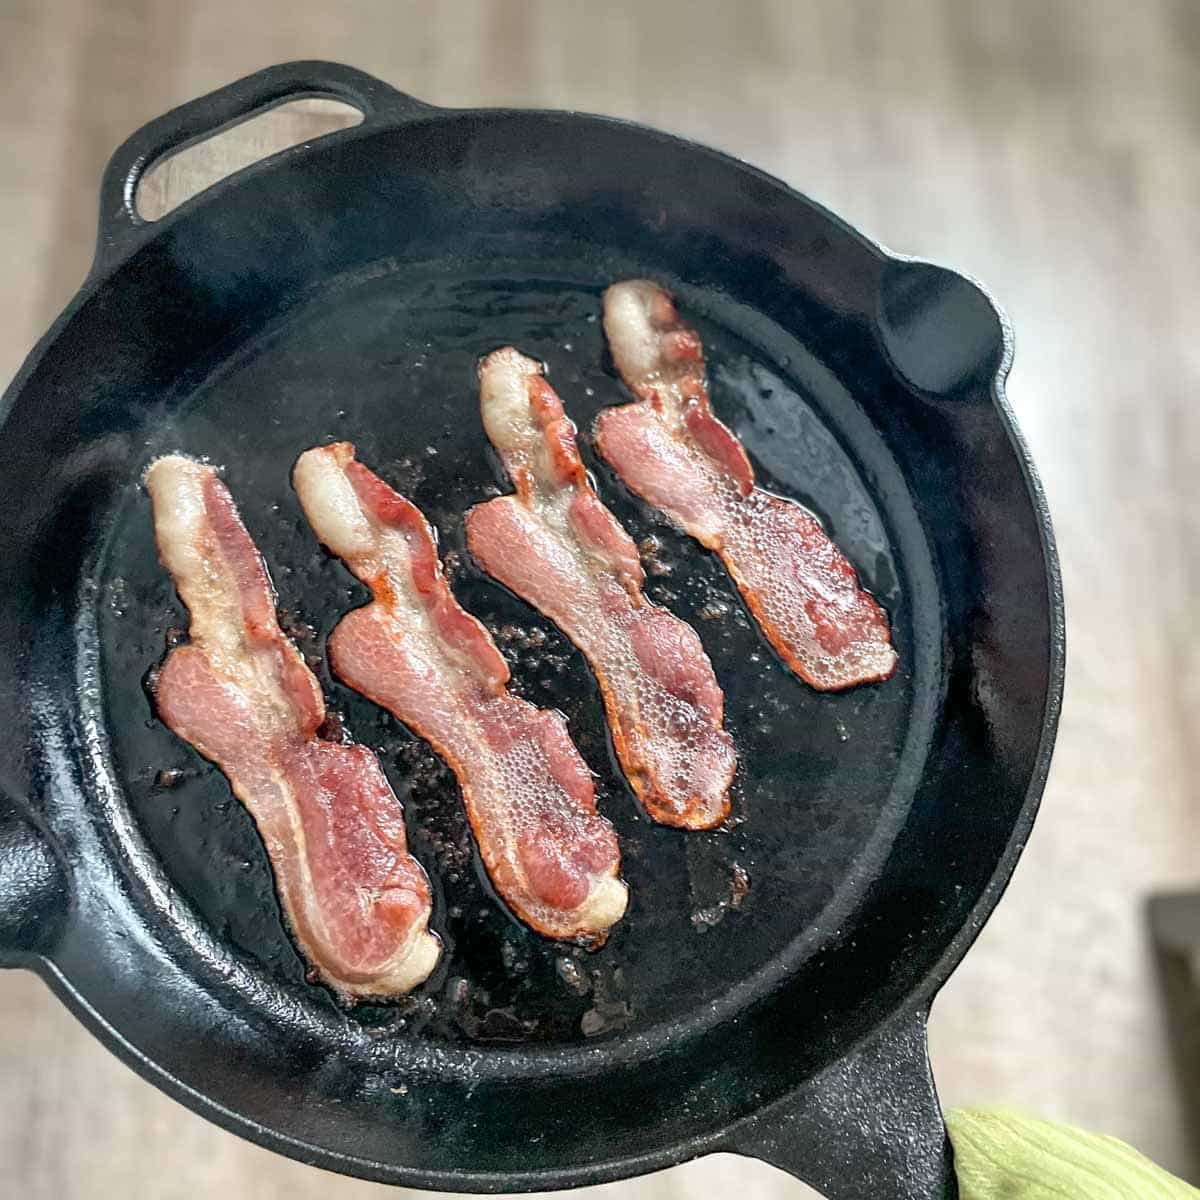 Bacon fries in a cast iron skillet.